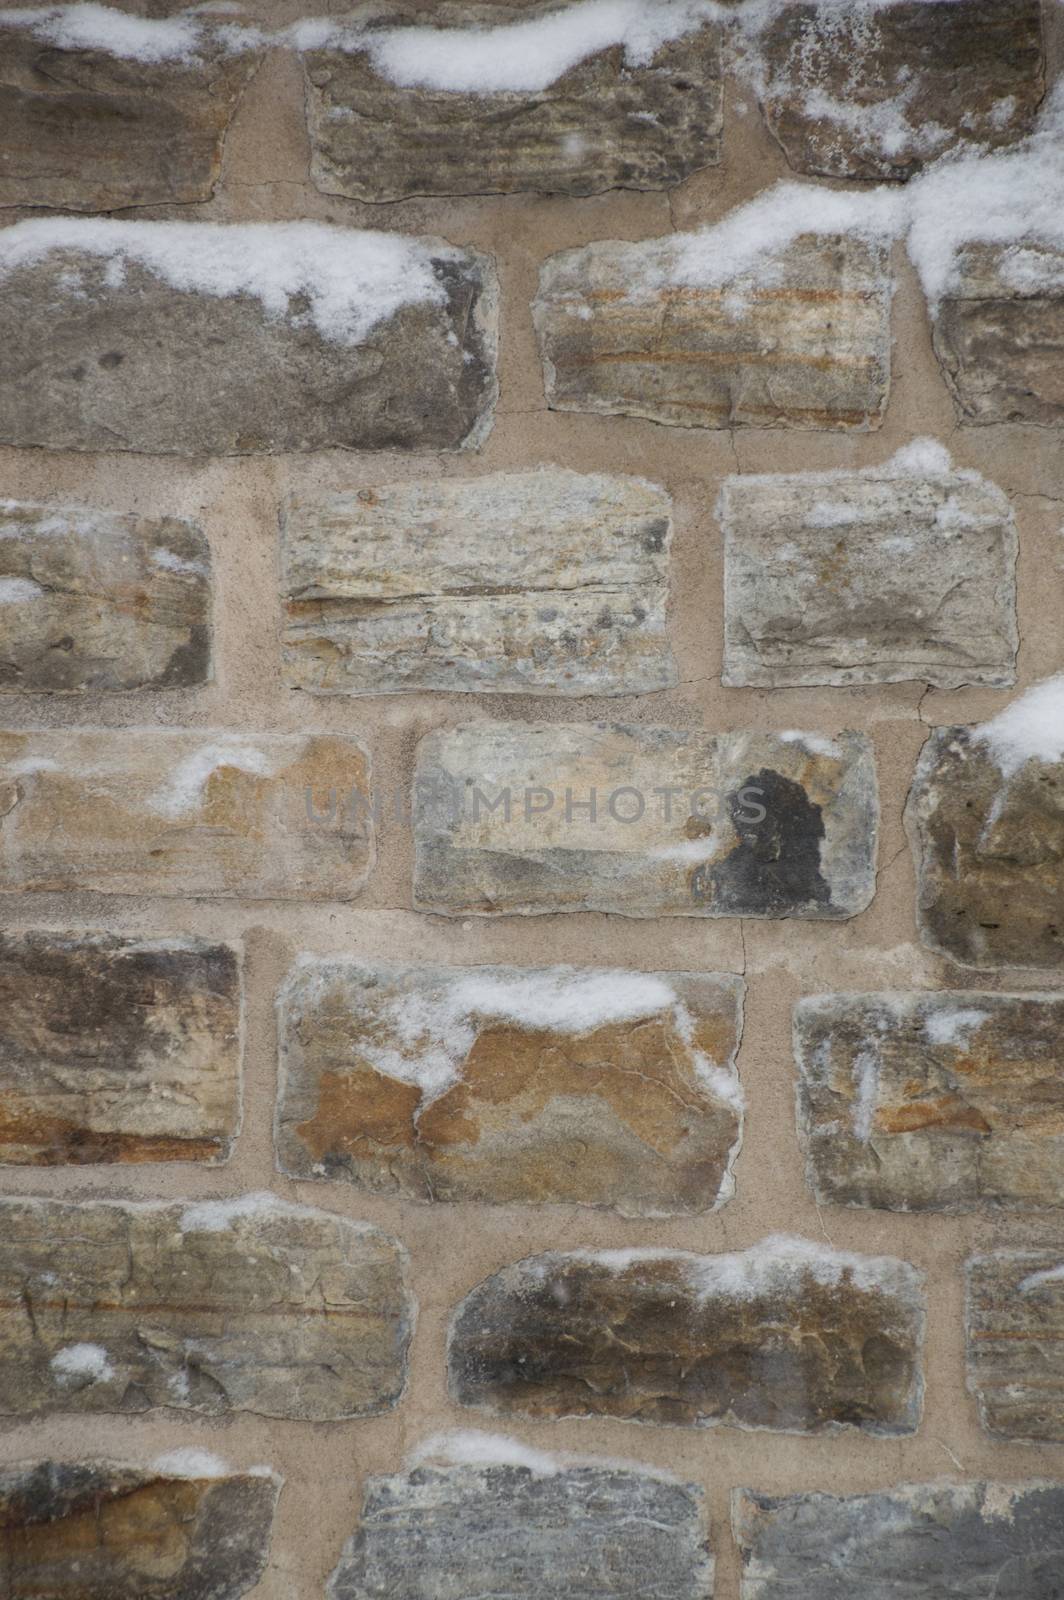 Wintry stone wall background with mortar